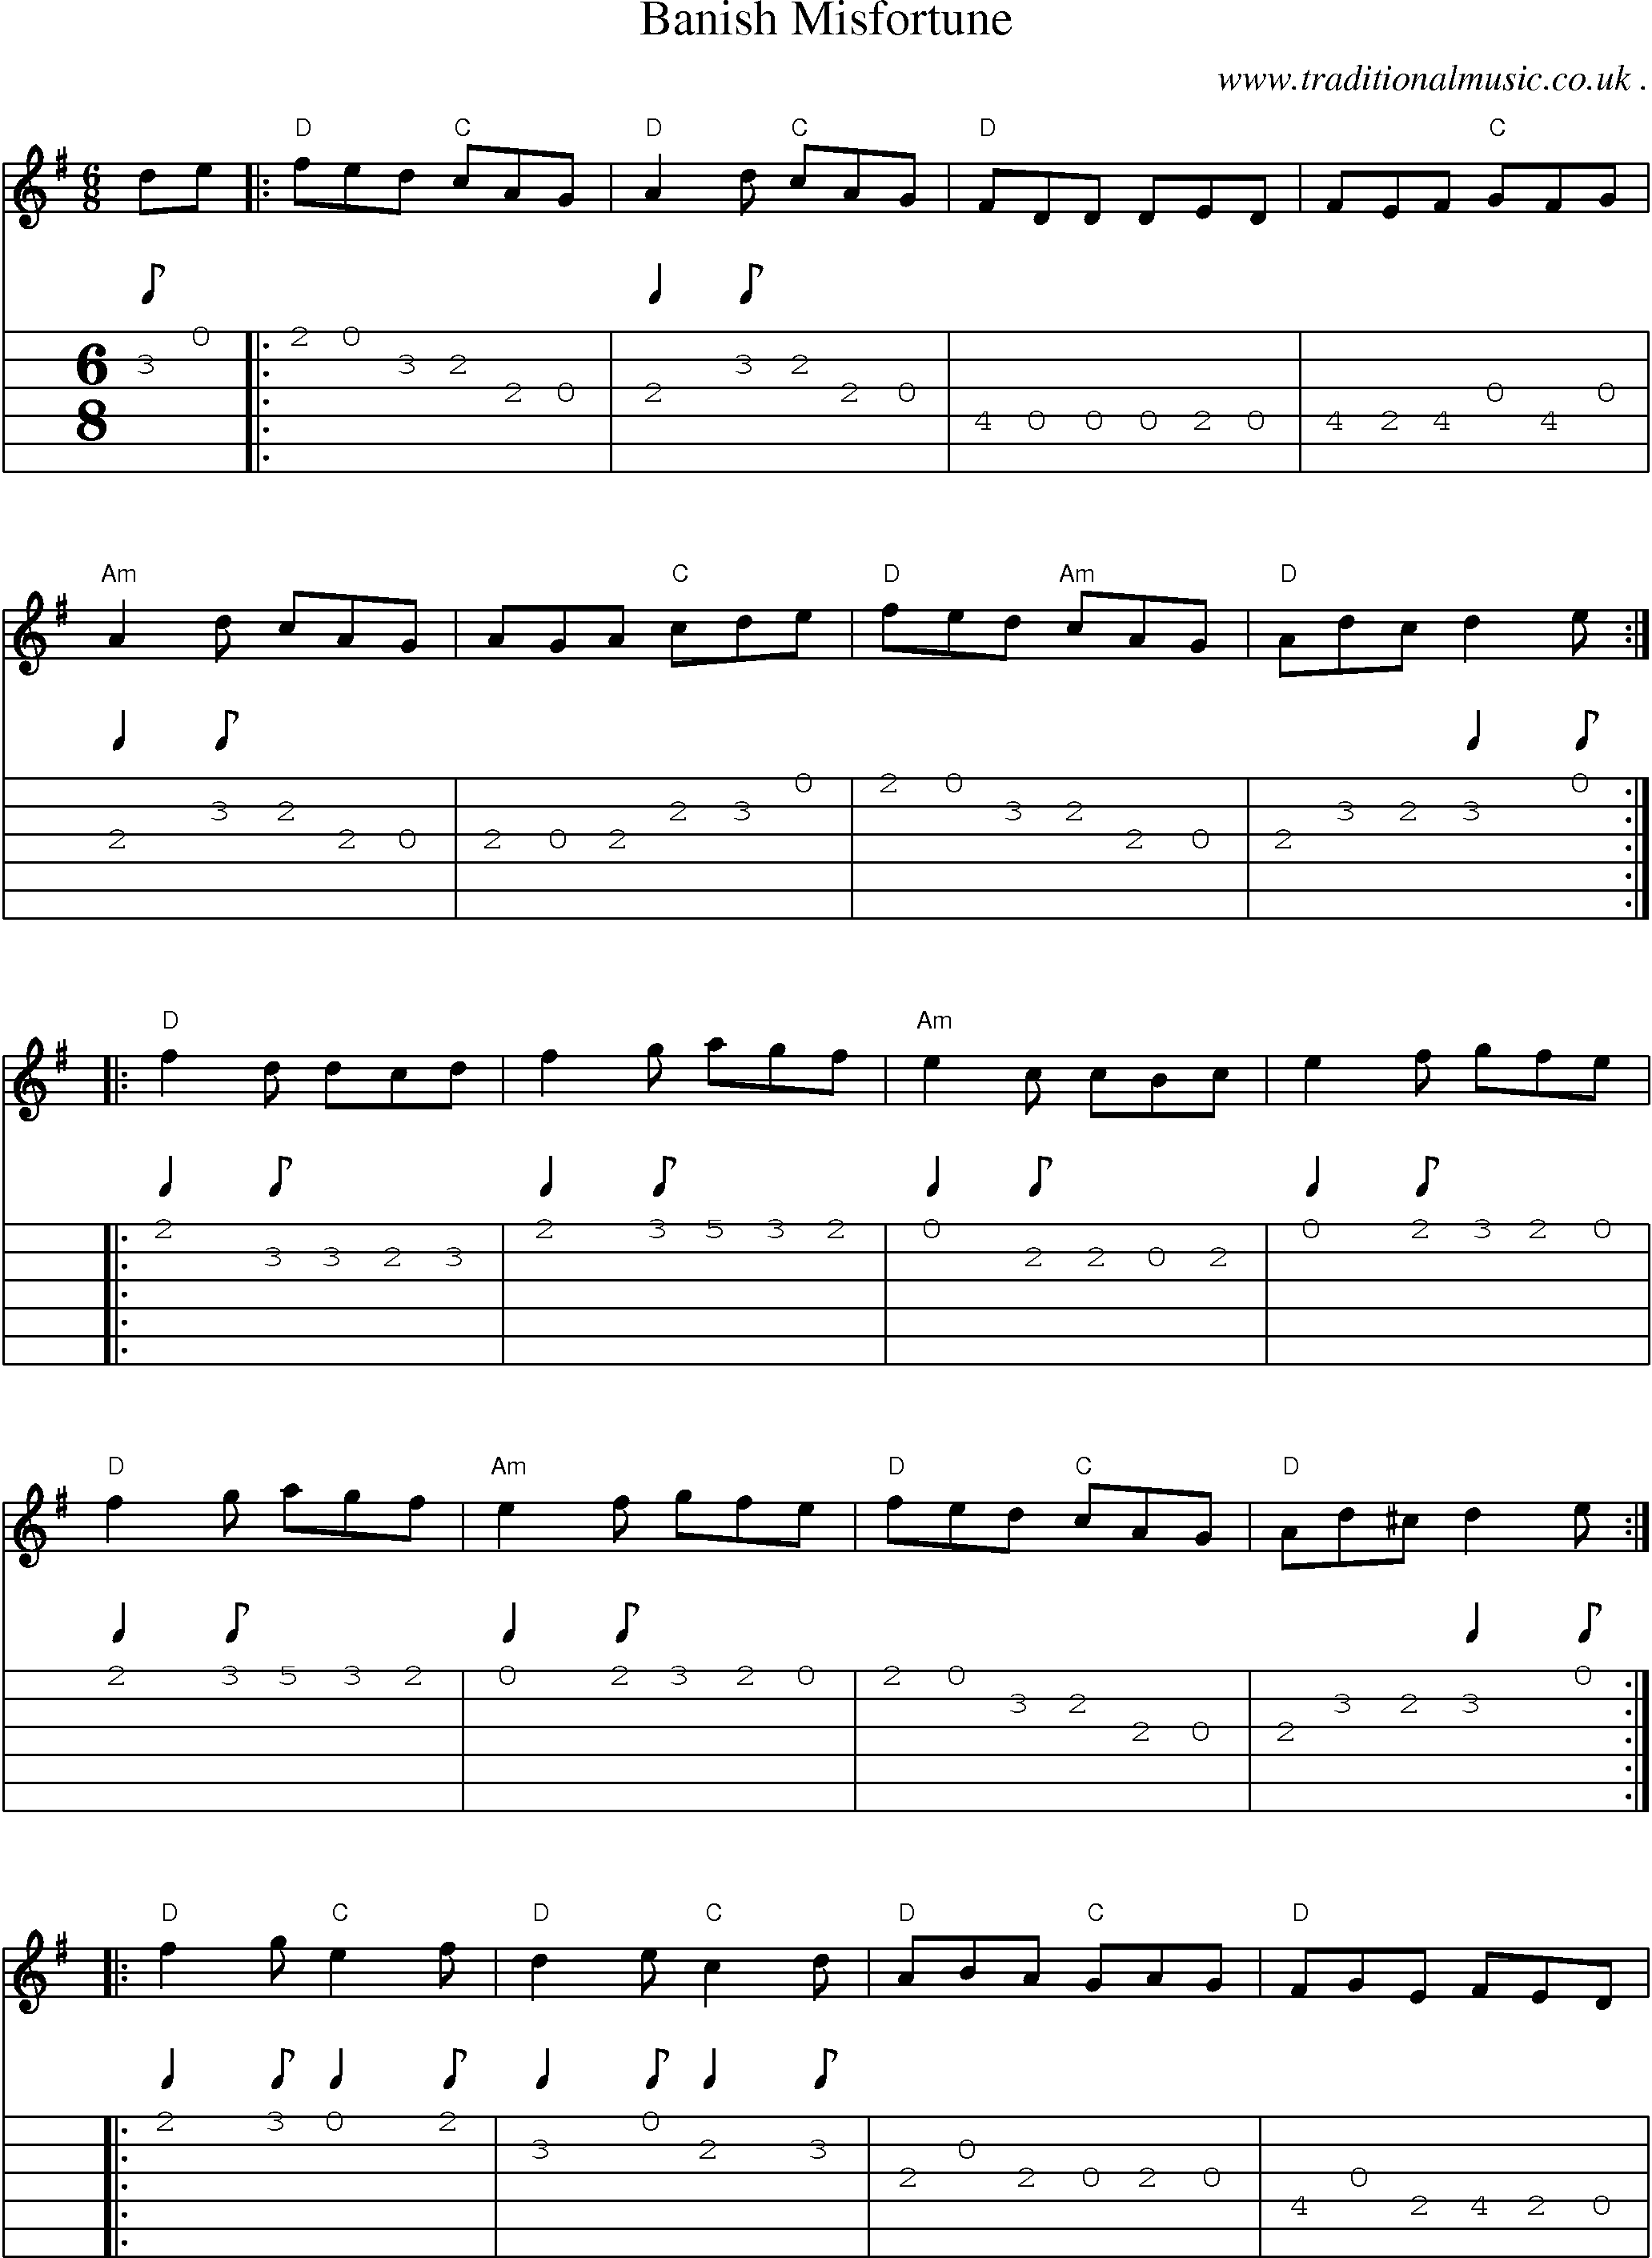 Music Score and Guitar Tabs for Banish Misfortune